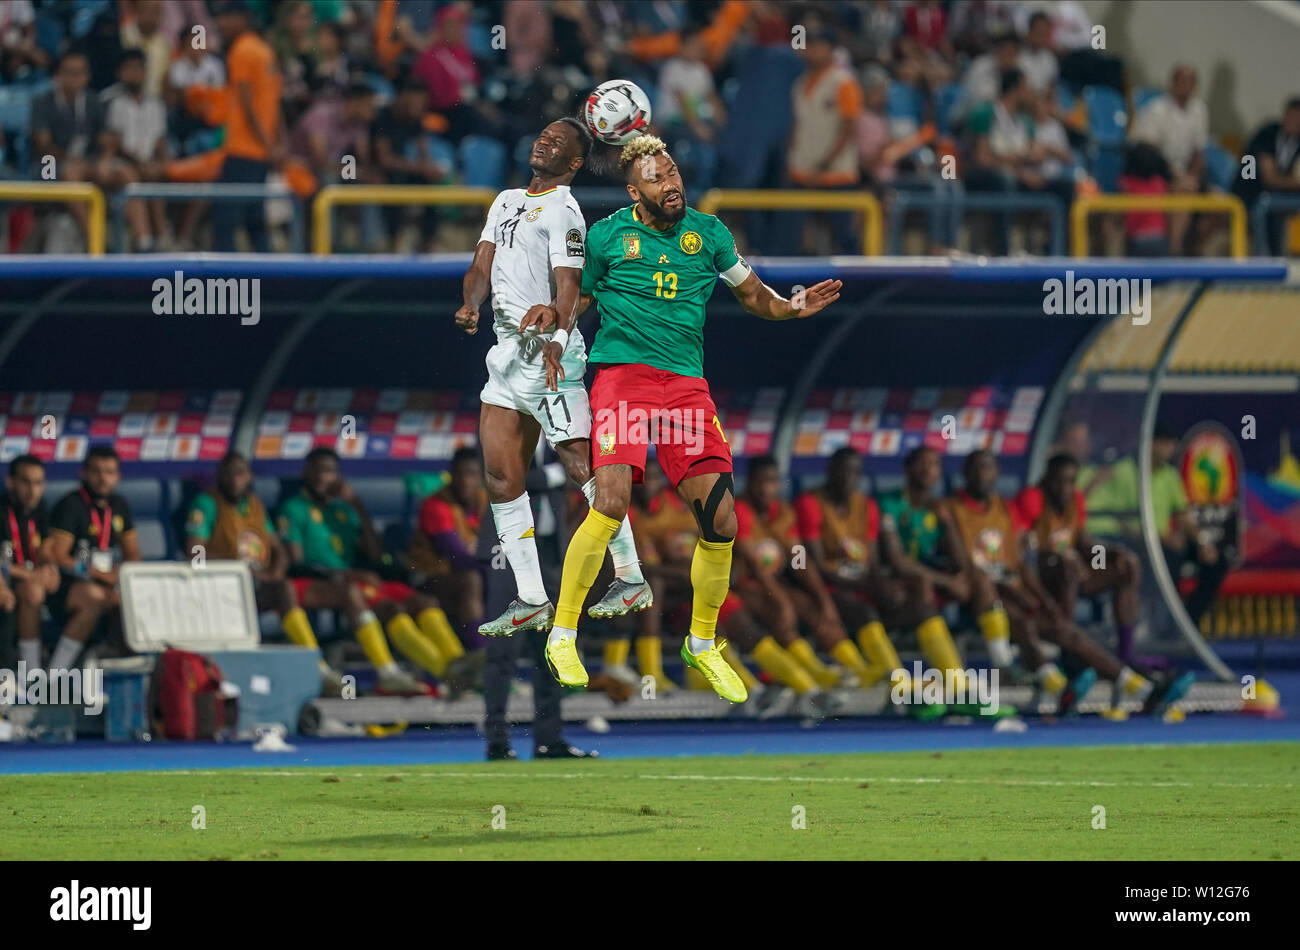 June 29, 2019: !c13! and Wakaso Mubarak of Ghana challenging for the ball during the 2019 African Cup of Nations match between Cameroon and Ghana at the Ismailia stadium in Ismailia, Egypt. Ulrik Pedersen/CSM. Stock Photo